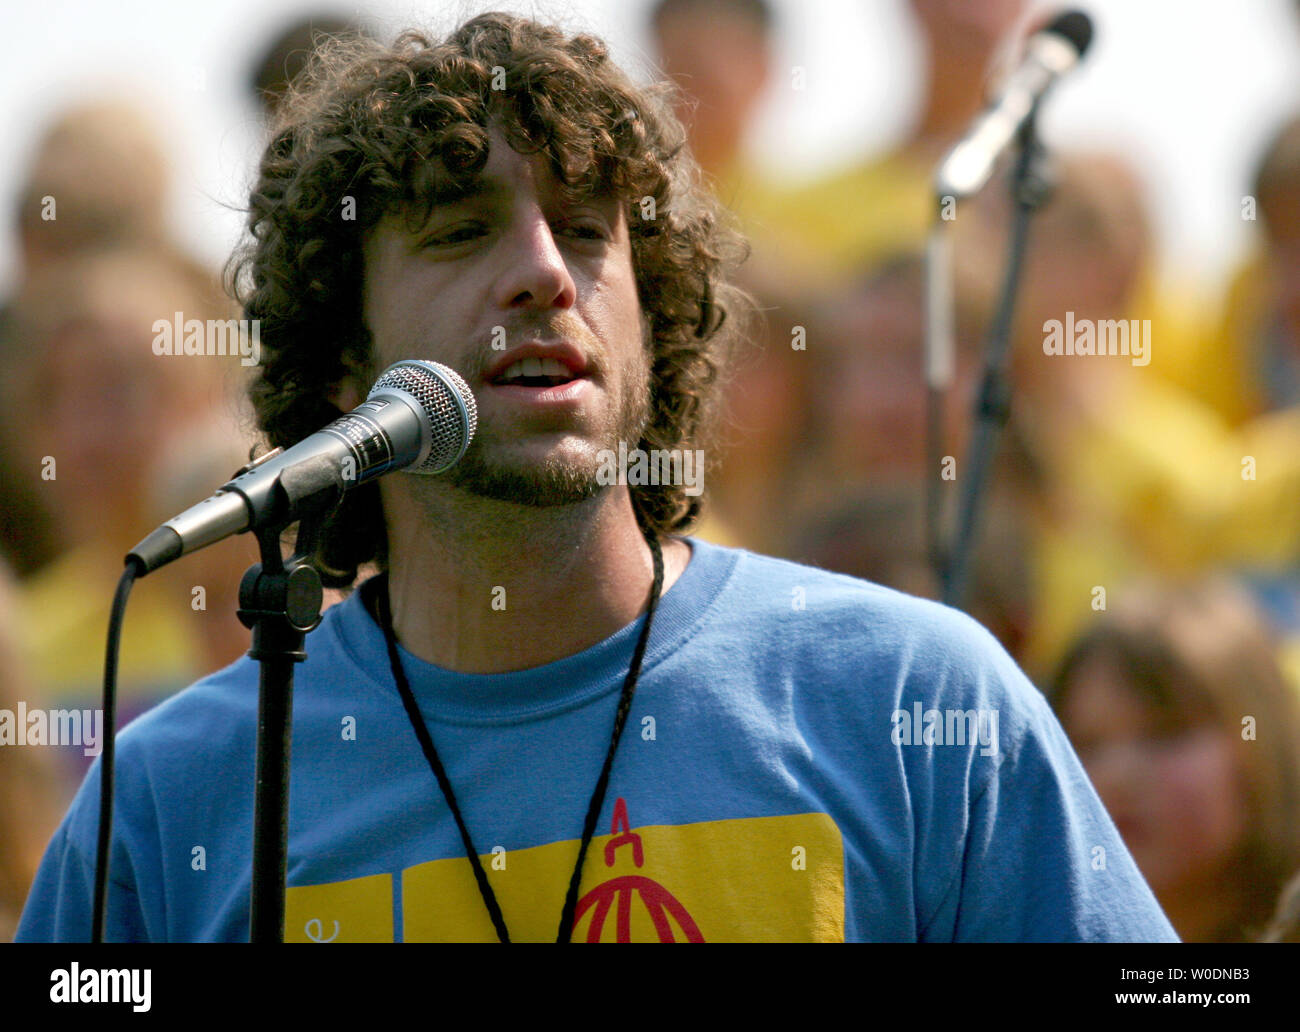 2006 American Idol Finalist Elliott Yamin and 150 children/delegates perform the song, 'Promise to Remember Me' on Capitol Hill in Washington on June 18, 2007. The Juvenile Diabetes Research Foundation held it's 'Children's Congress 2007' in an effort to raise awareness in Congress. (UPI Photo/Dominic Bracco II) Stock Photo